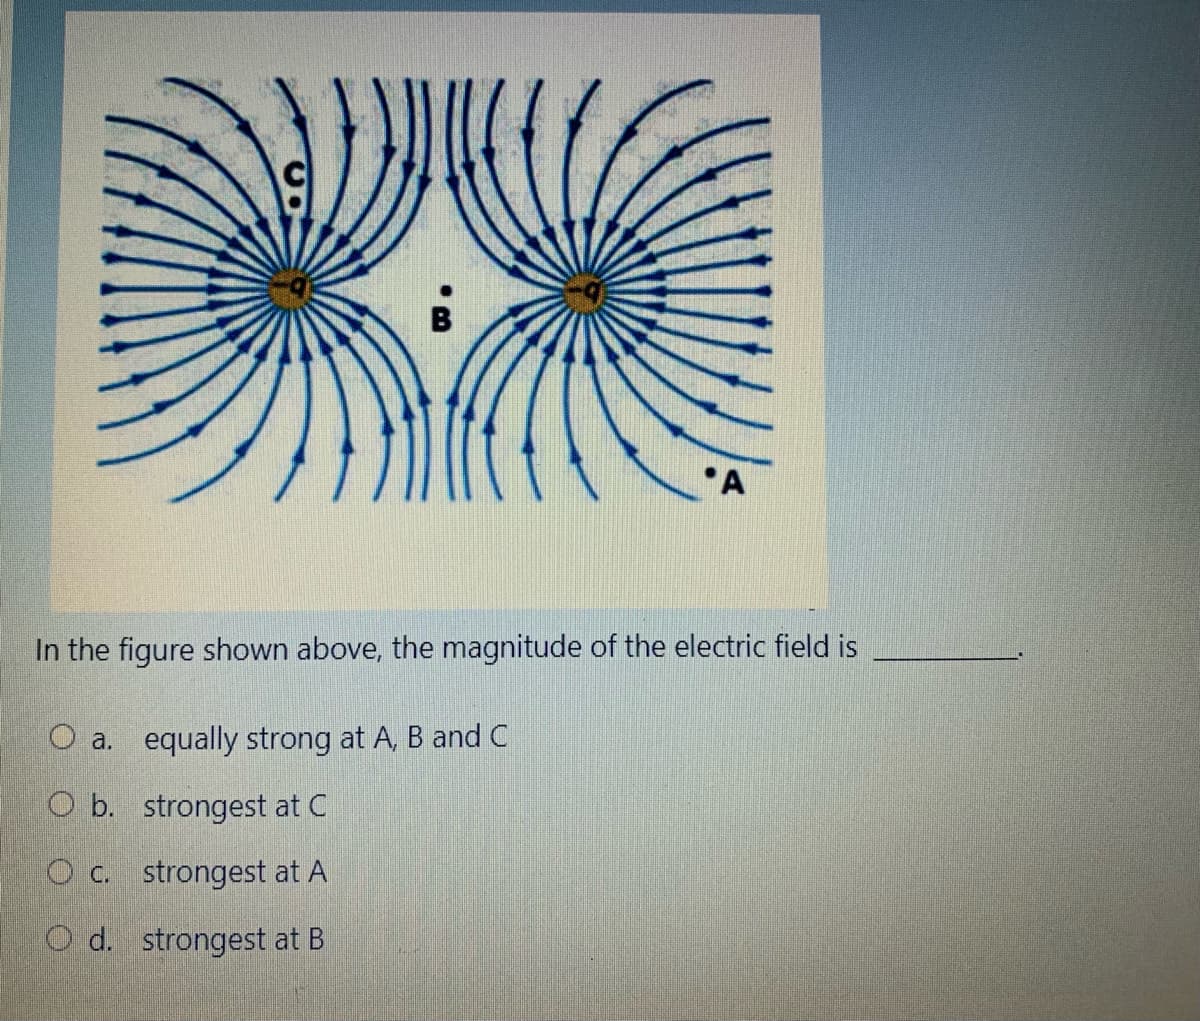 *A
In the figure shown above, the magnitude of the electric field is
O a. equally strong at A, B and C
O b. strongest at C
gest at A
O d. strongest at B
